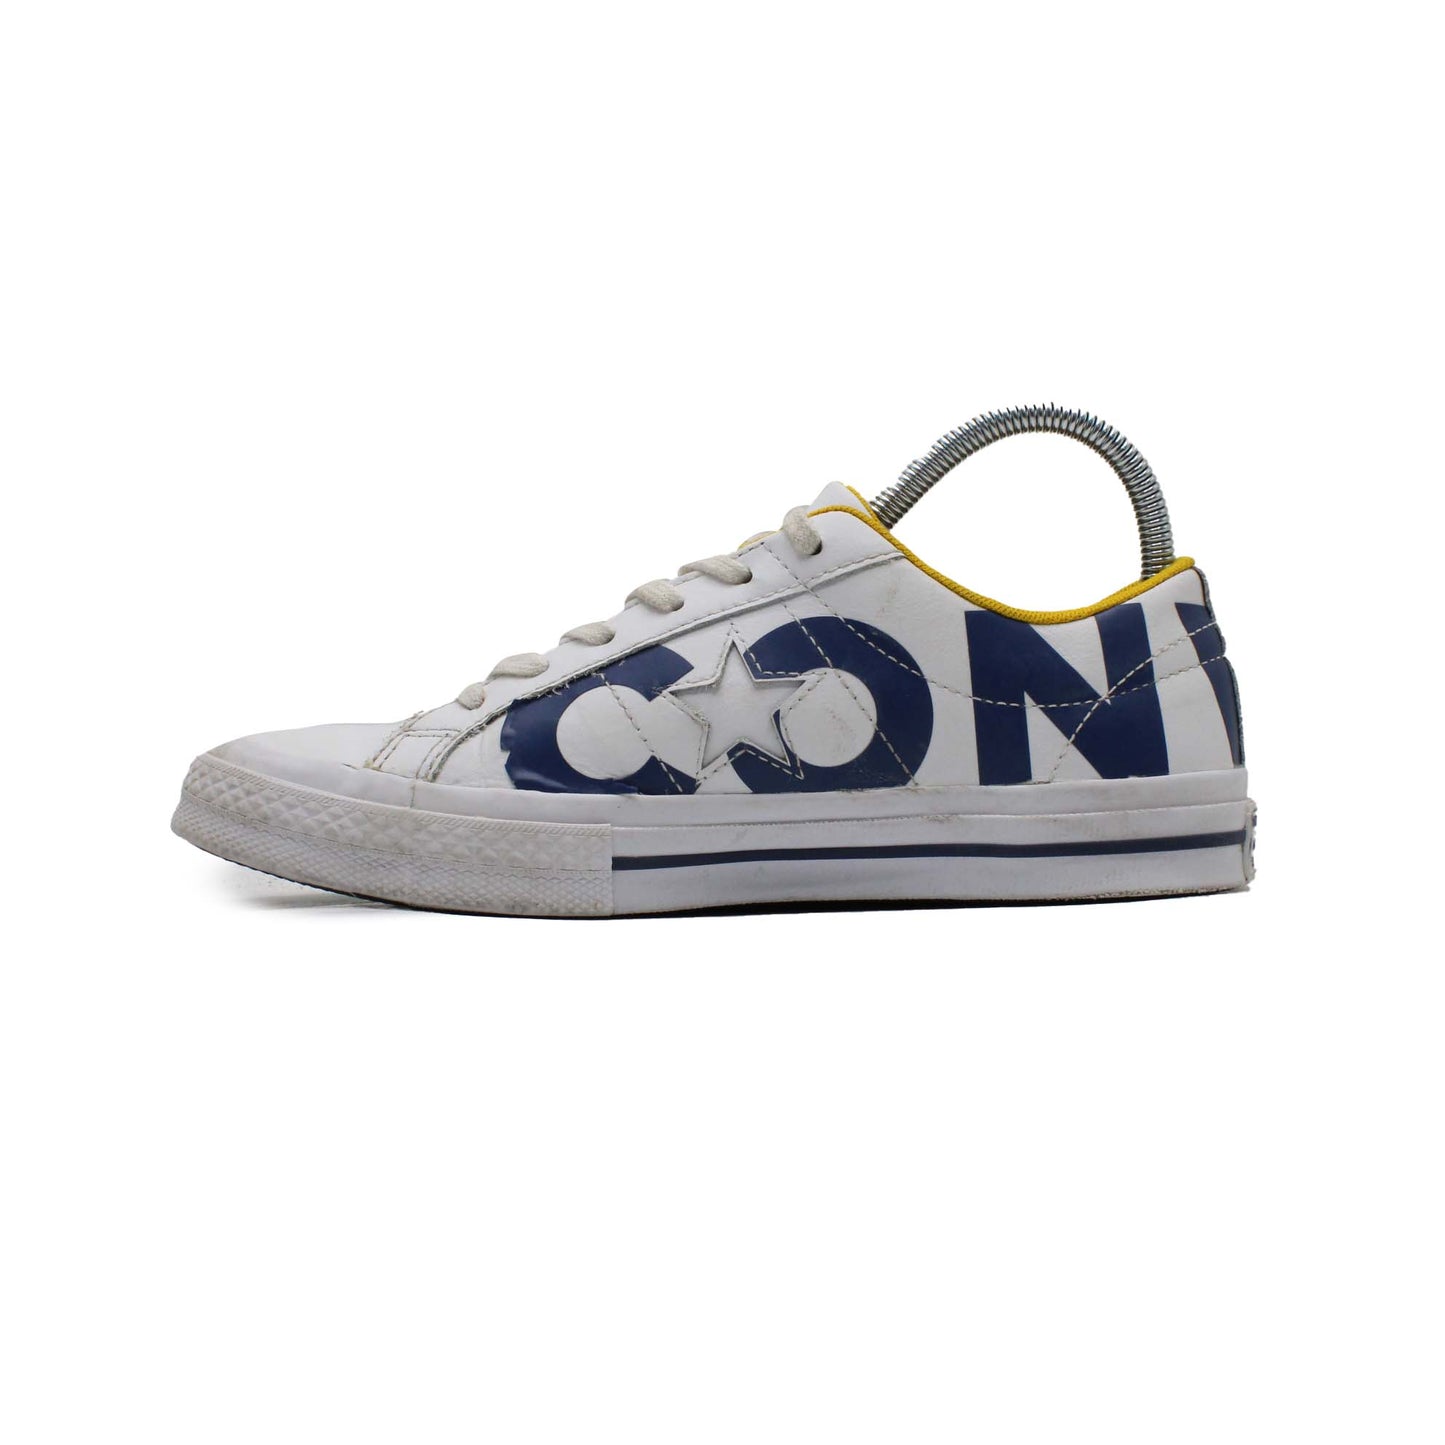 Converse All Star Chuck Taylor Athletic Shoe